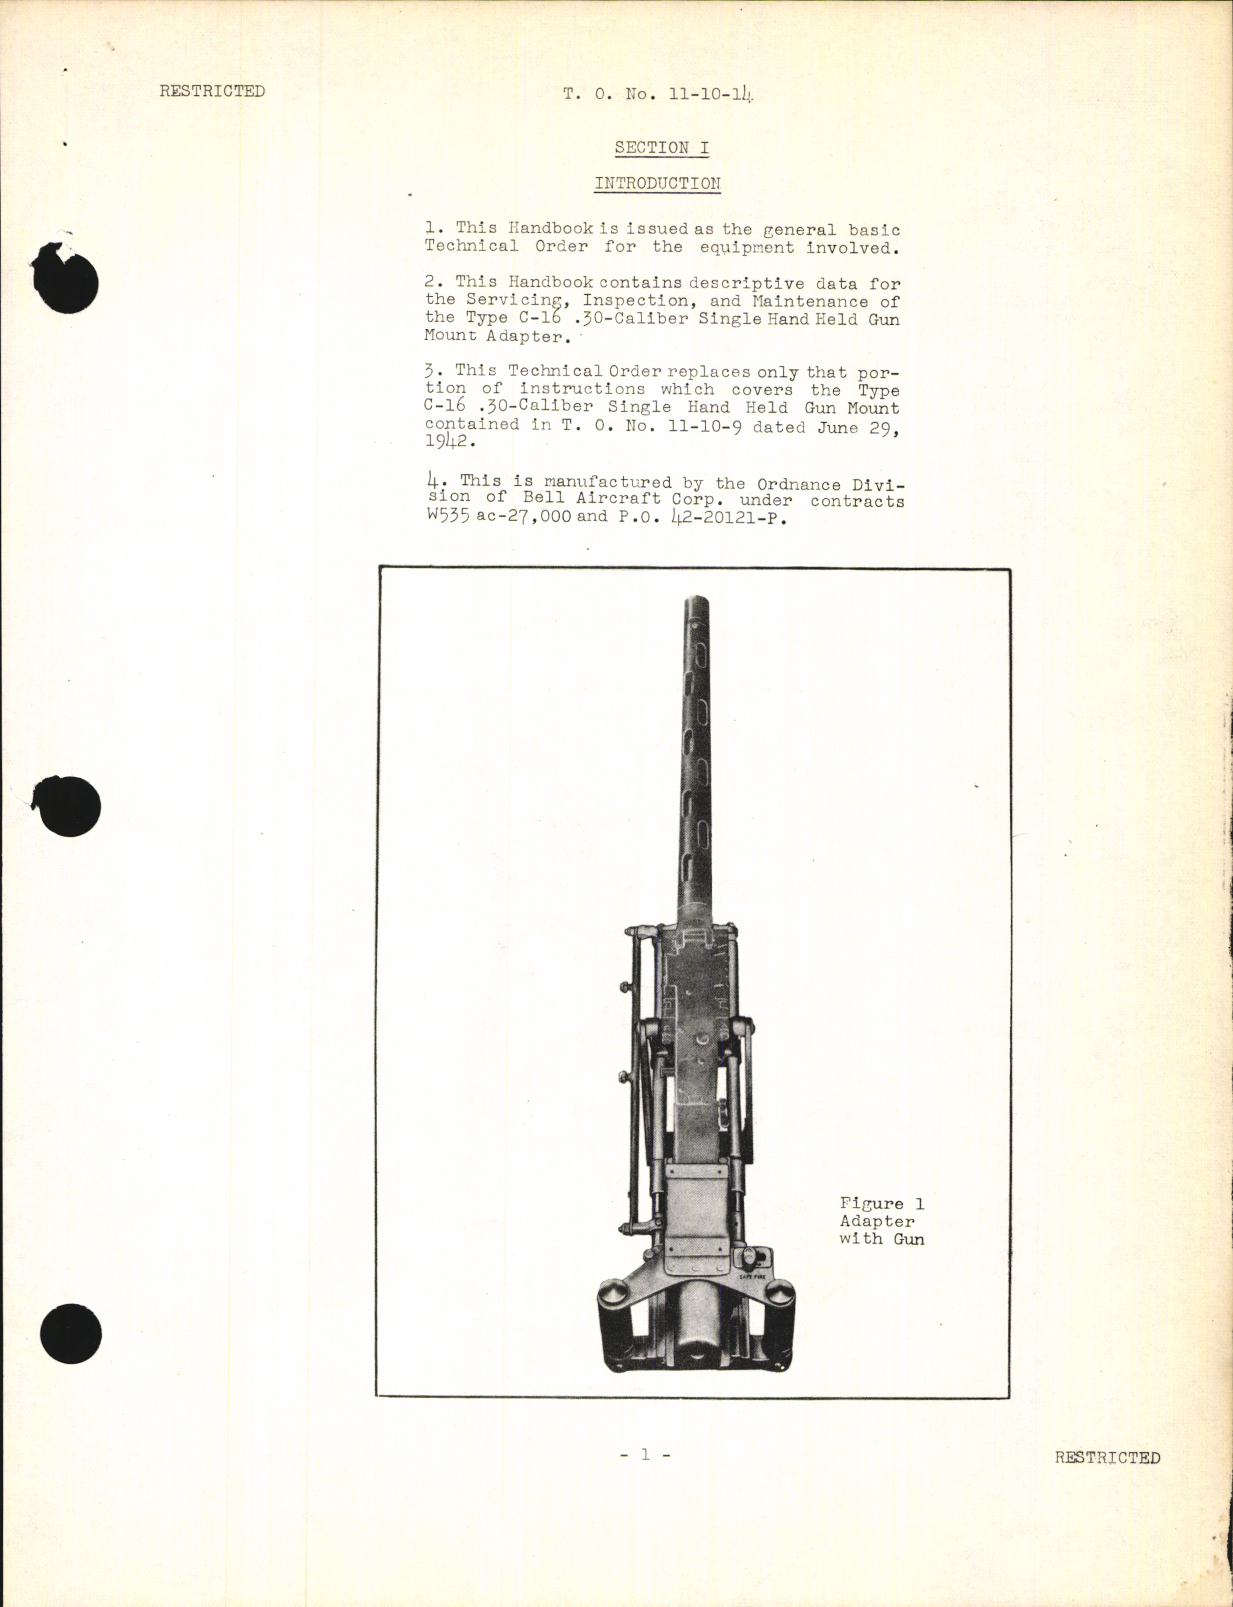 Sample page 5 from AirCorps Library document: Handbook of Instructions with Parts Catalog for Type C-16 Single Gun Mount Adapter